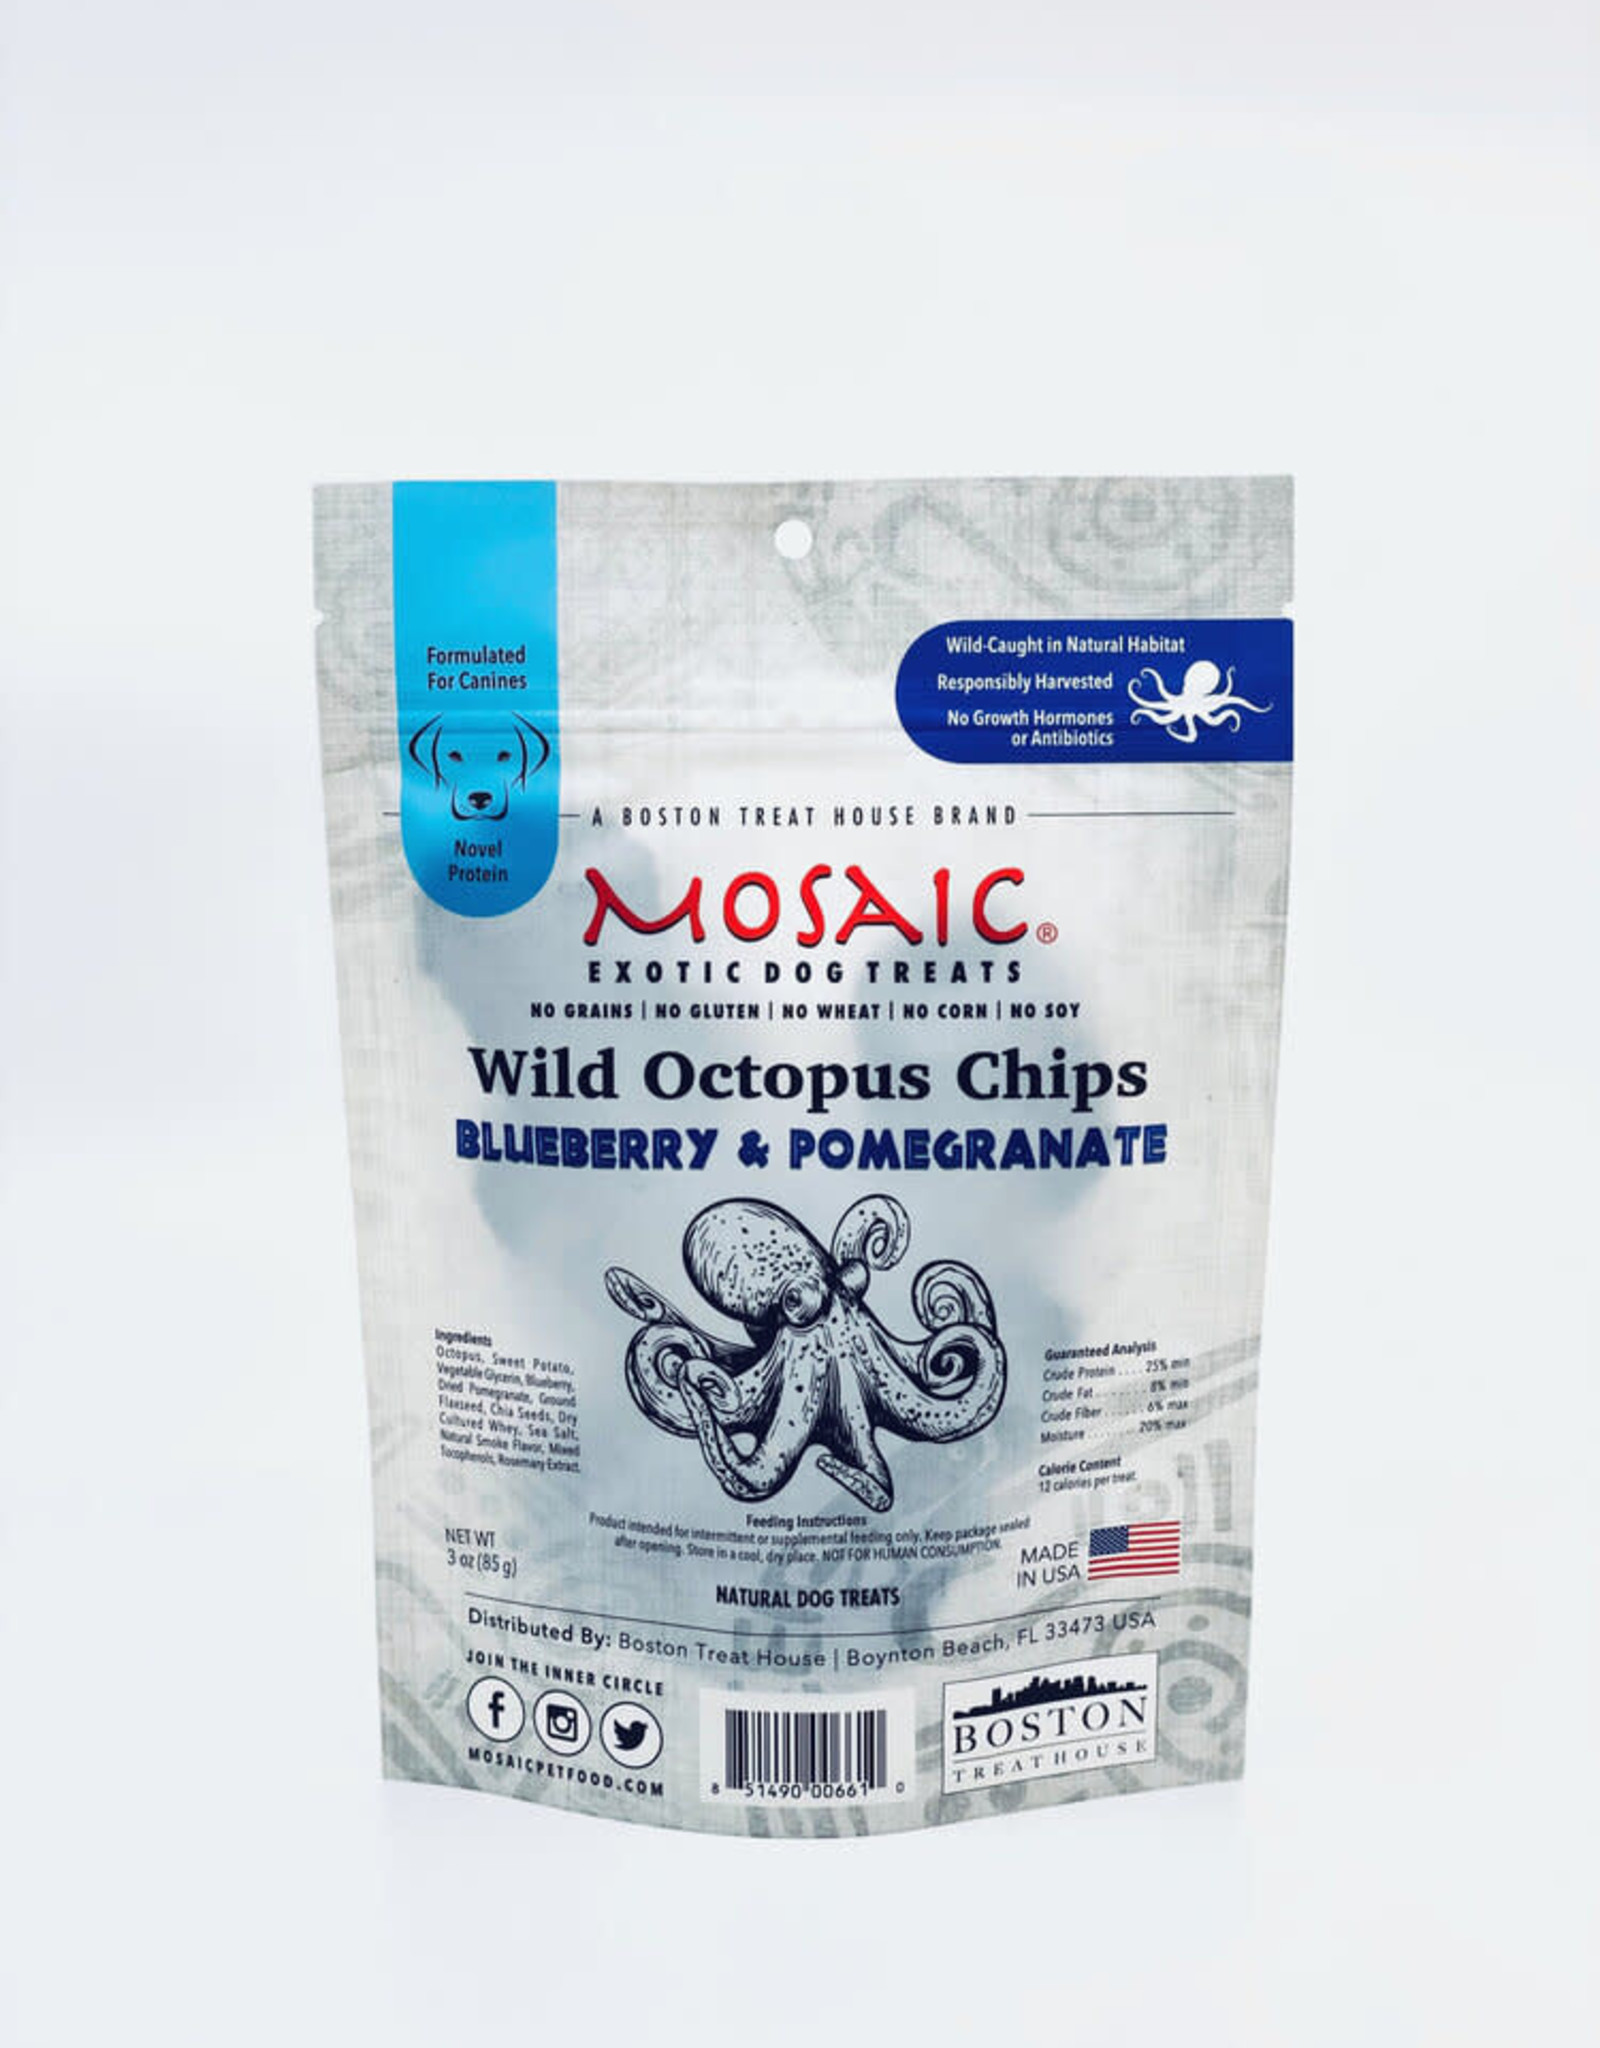 Mosaic Wild Octopus Chips Blueberry & Pomegranate